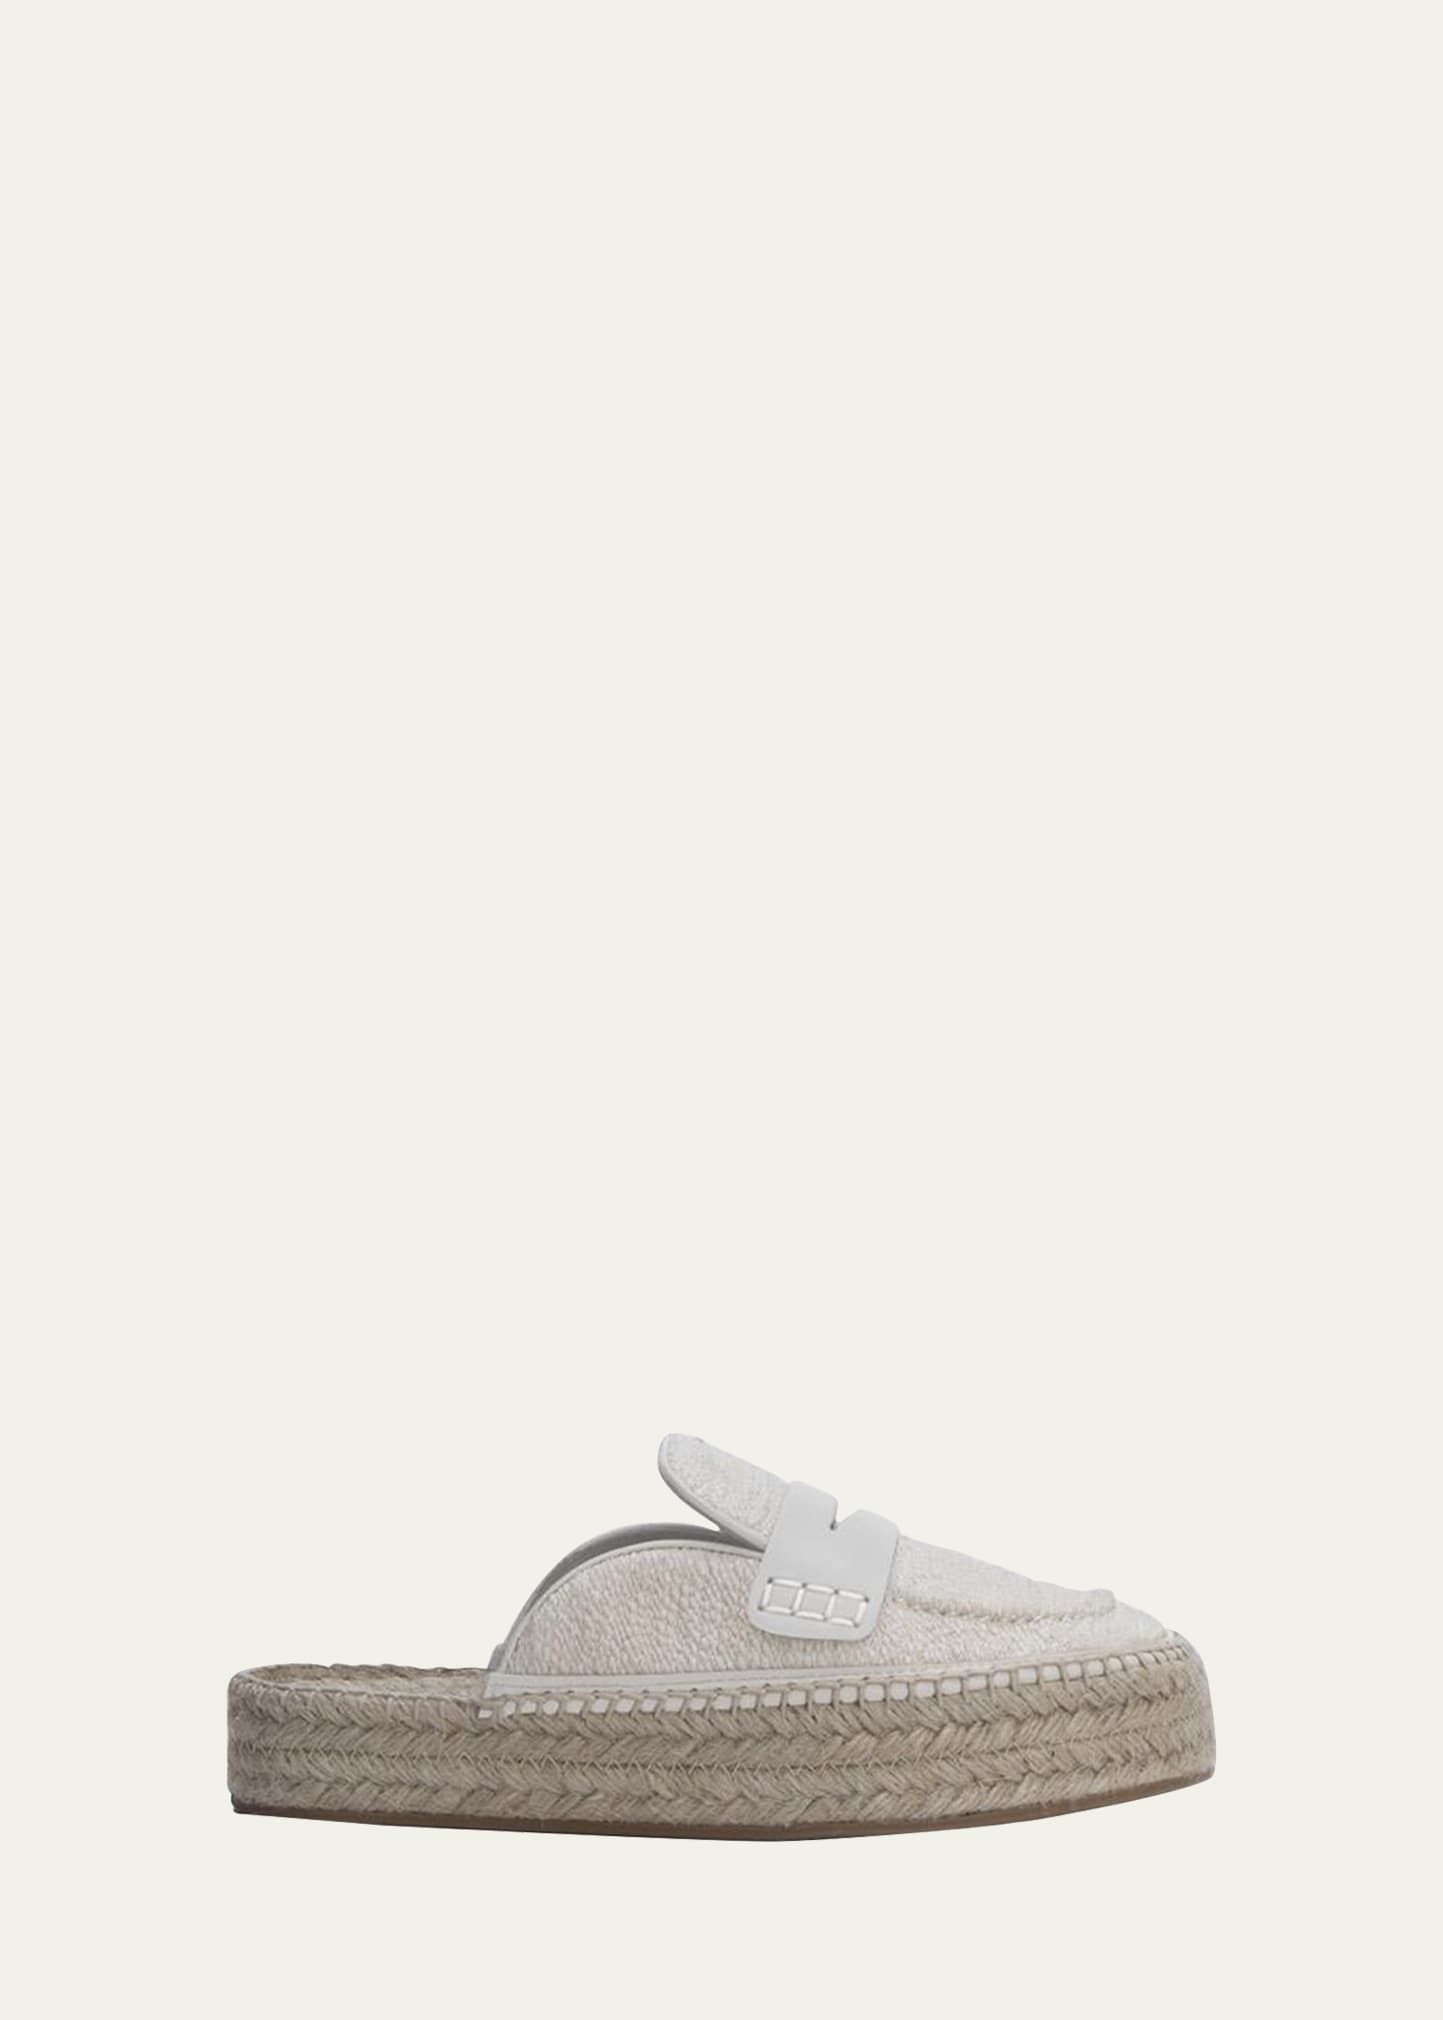 JW Anderson Cotton Penny Loafer Espadrille Mules - Bergdorf Goodman